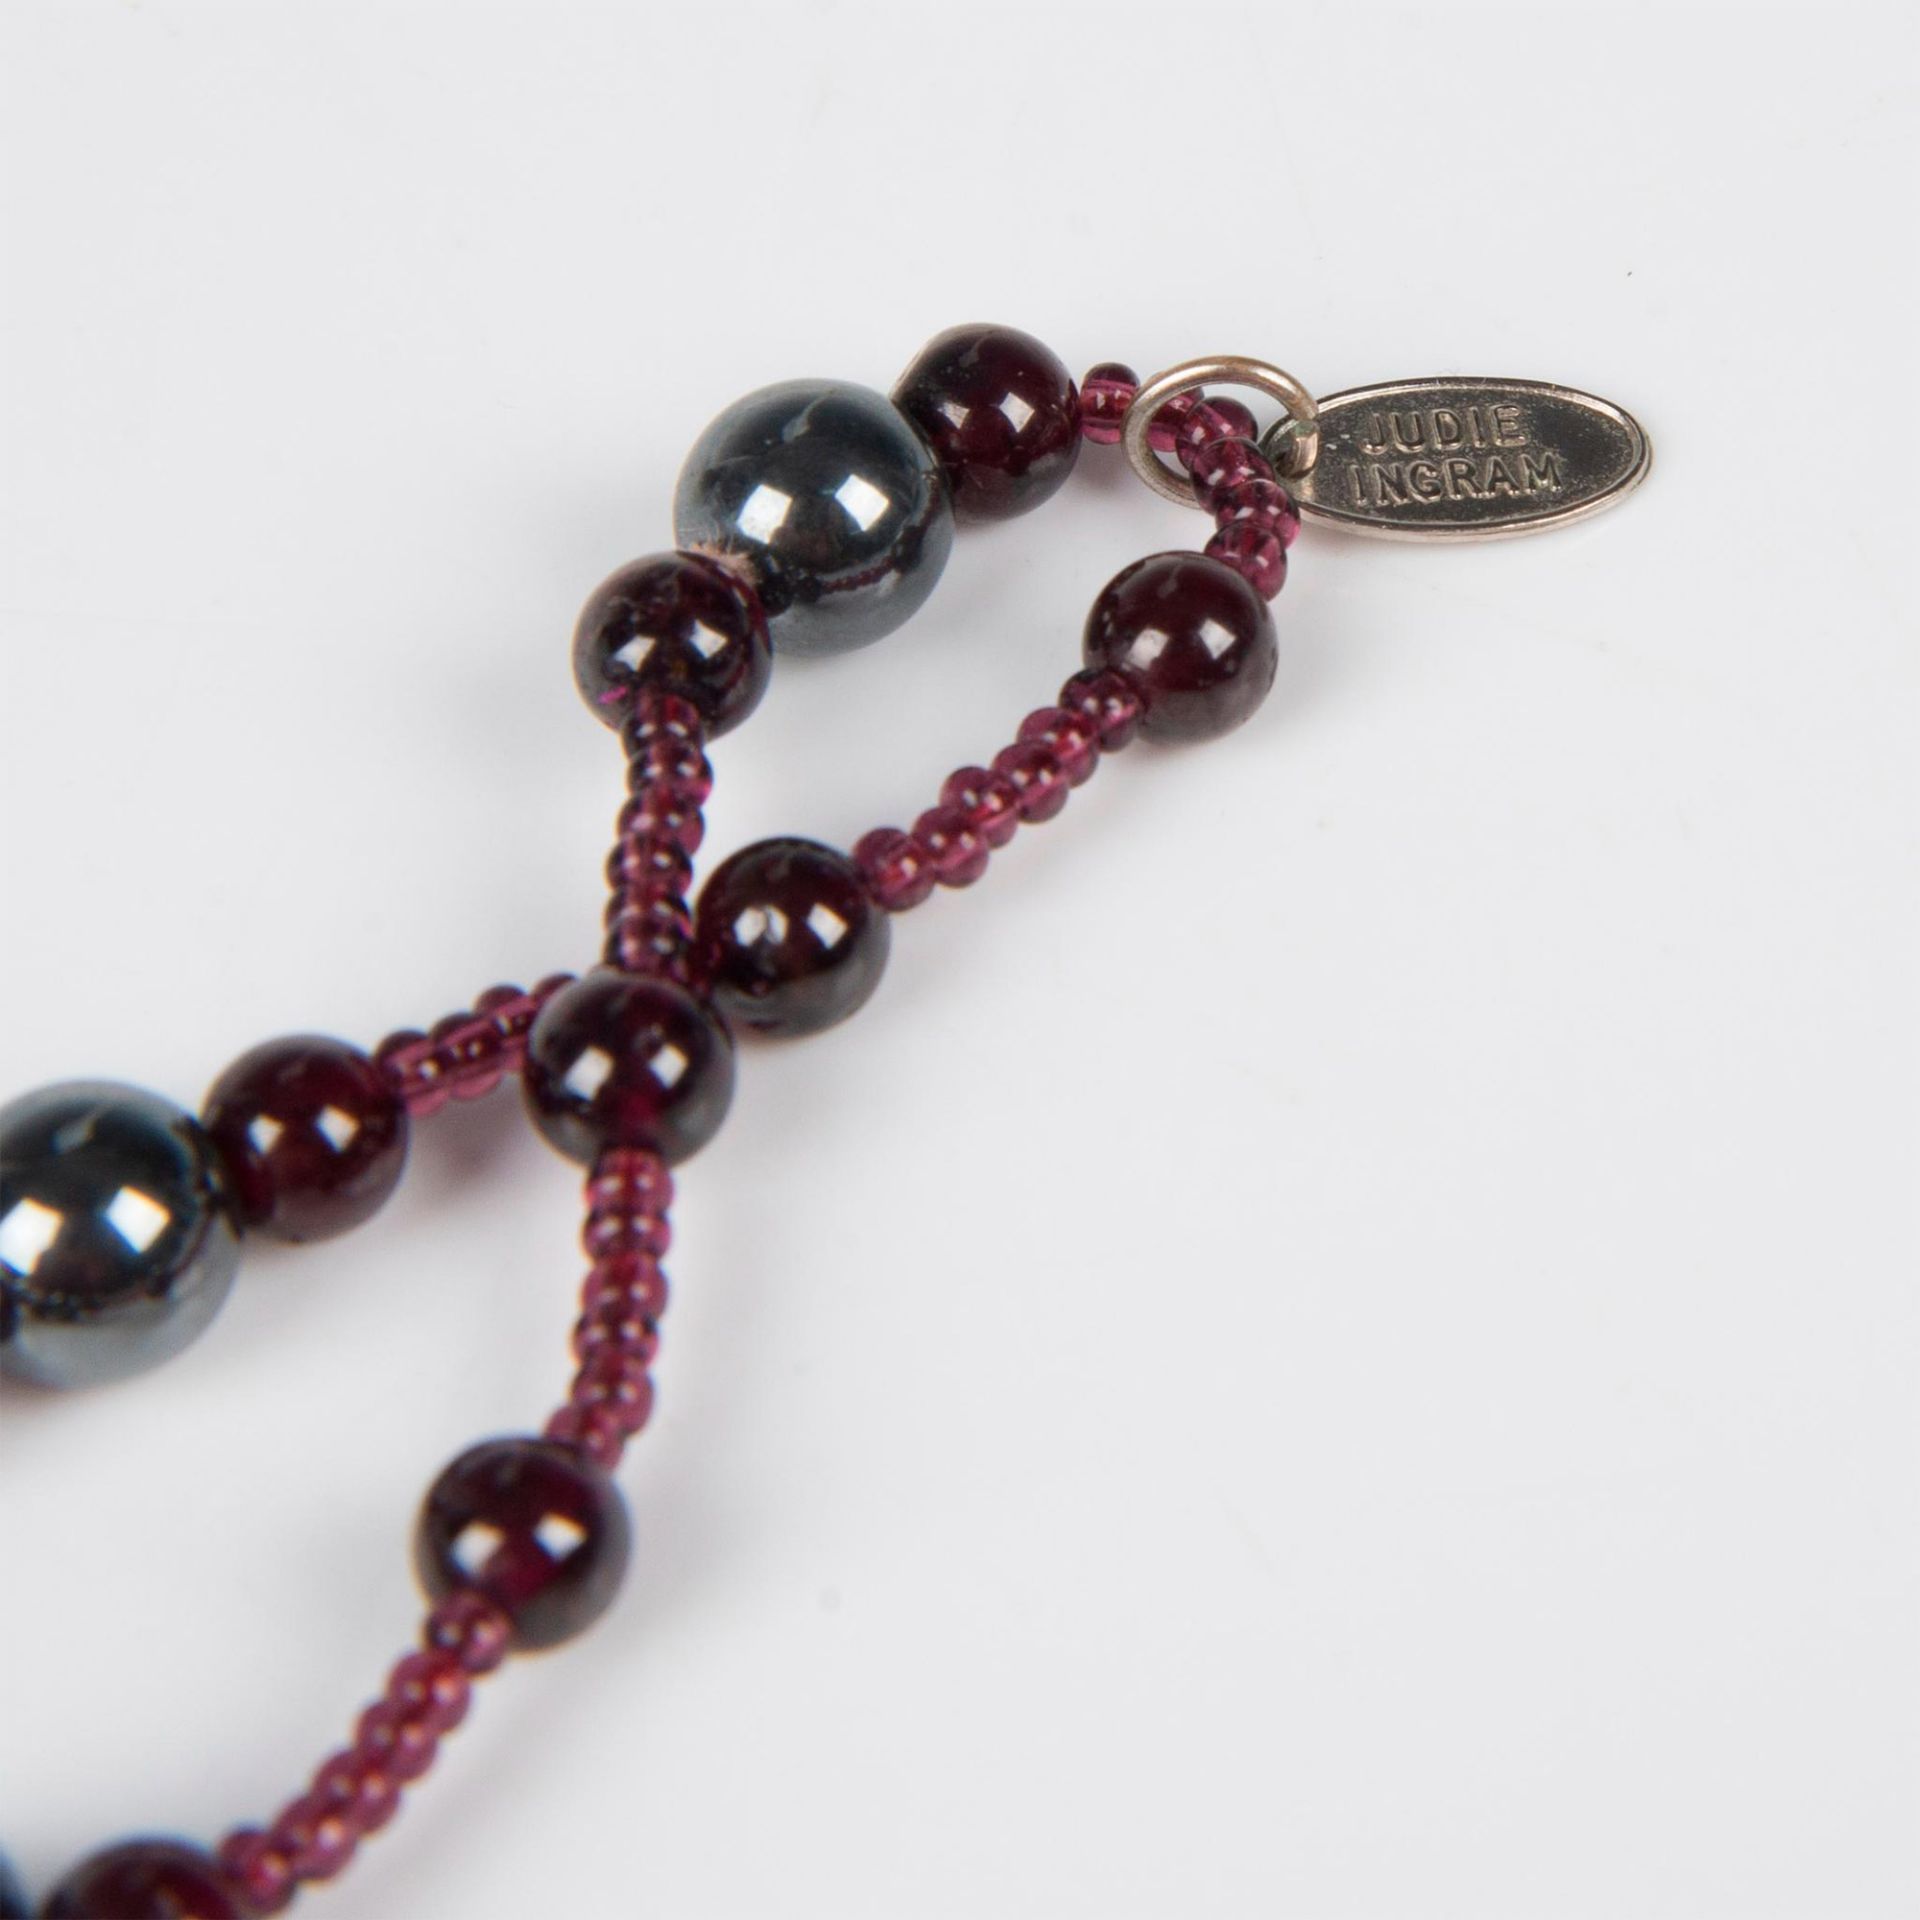 Judie Ingram Hematite and Beaded Sterling Silver Necklace - Image 5 of 5